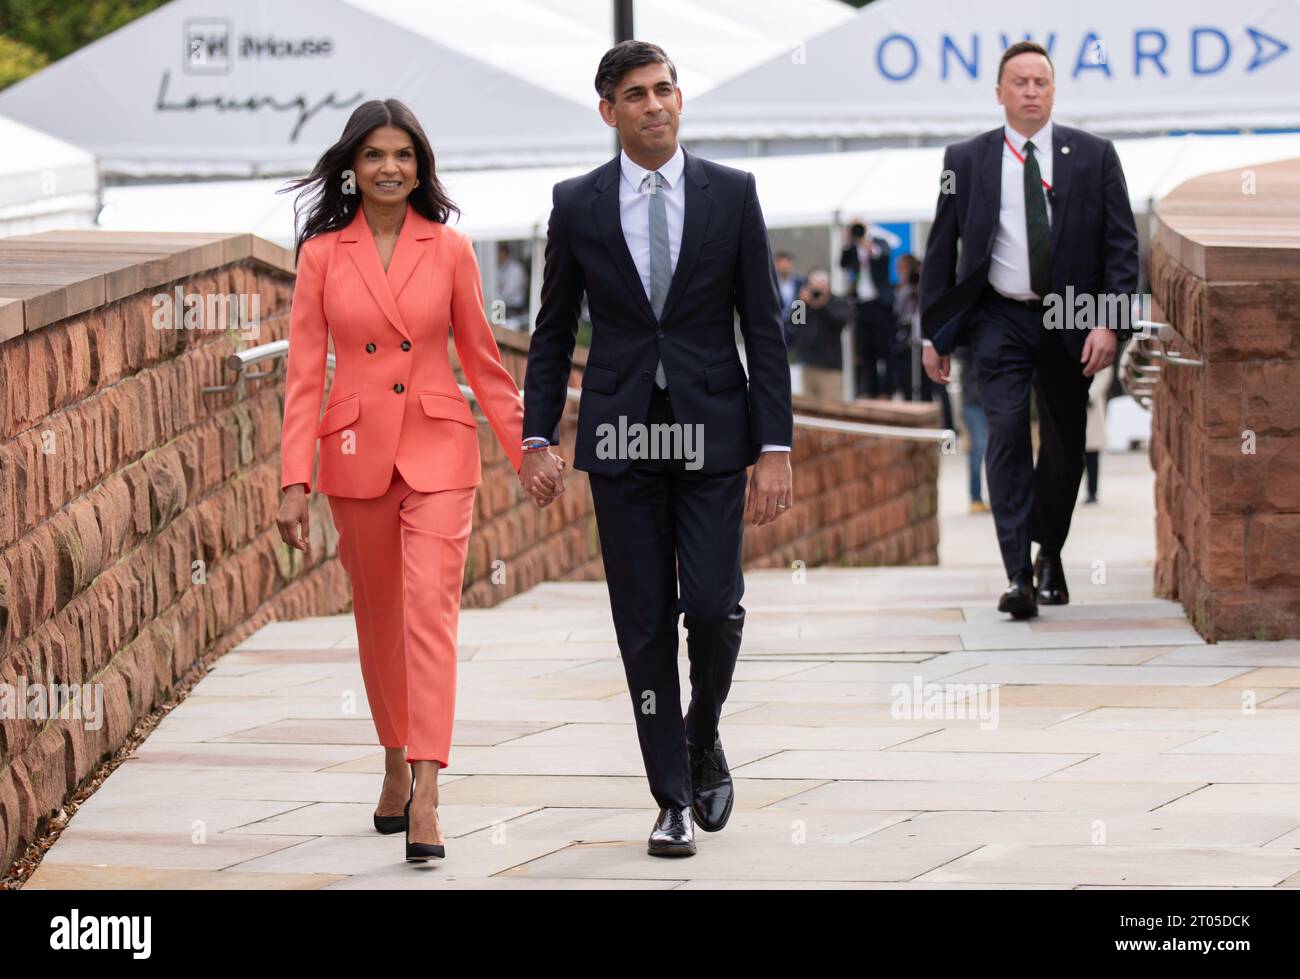 Manchester, UK. 04th Oct, 2023 The PM Rishi Sunak and wife,Akshata Murthy, walk from the Midland Hotel to the Manchester Conference centre where he gave the speech introduced by his wife Akshata Murthy. Manchester UK. Credit: GaryRobertsphotography/Alamy Live News Credit: GaryRobertsphotography/Alamy Live News Stock Photo